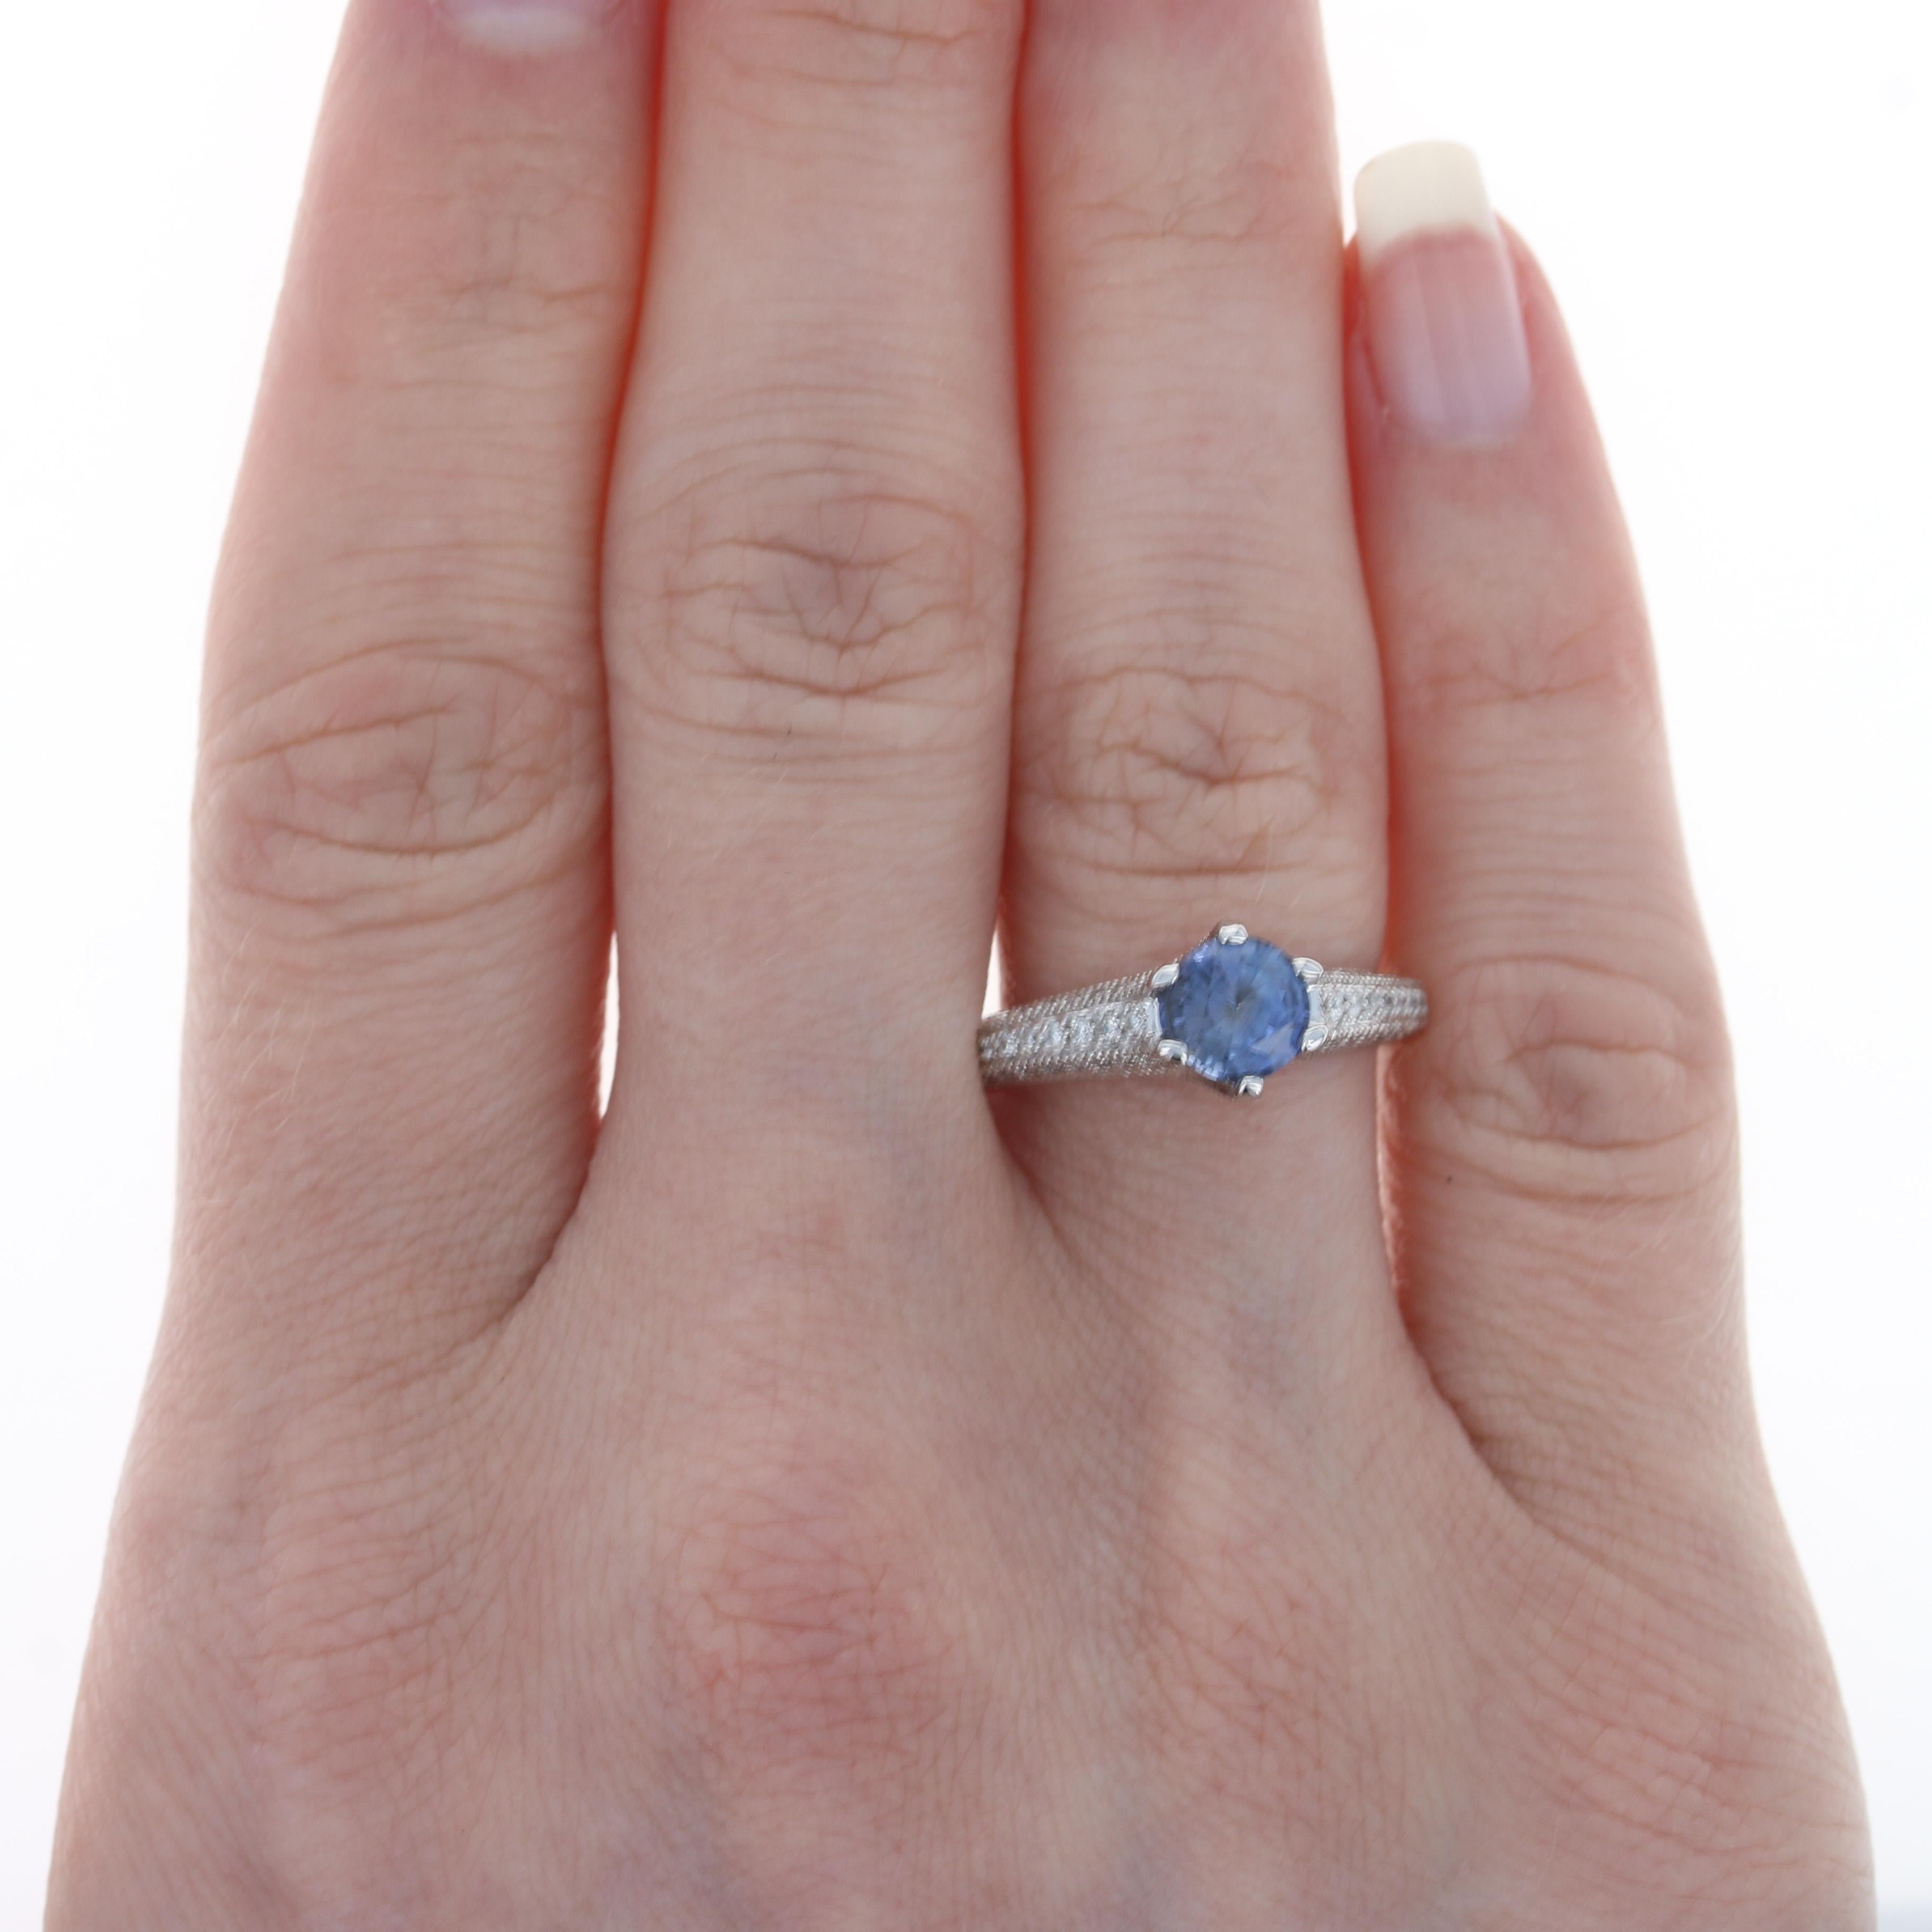 Size: 7 1/4
Sizing Fee: Down 1 size for $25 or Up 2 sizes for $30

Metal Content: 14k White Gold

Stone Information: 
Genuine Sapphire
Treatment: Heating
Carat(s): 1.07ct (weighed)
Cut: Round
Color: Purplish Blue
Diameter: 6.1mm 

Natural